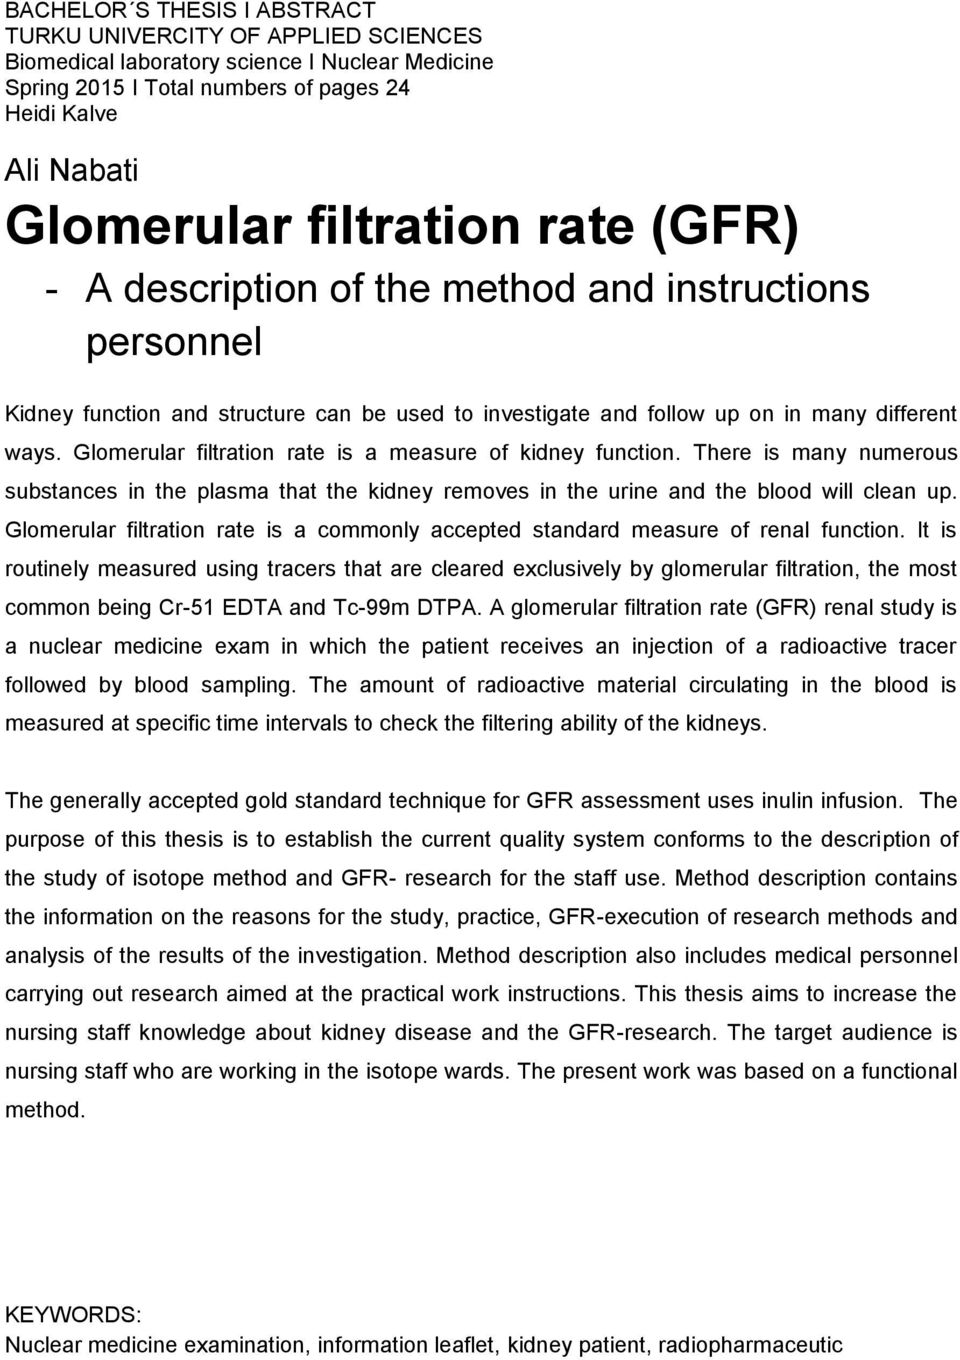 Glomerular filtration rate is a measure of kidney function. There is many numerous substances in the plasma that the kidney removes in the urine and the blood will clean up.